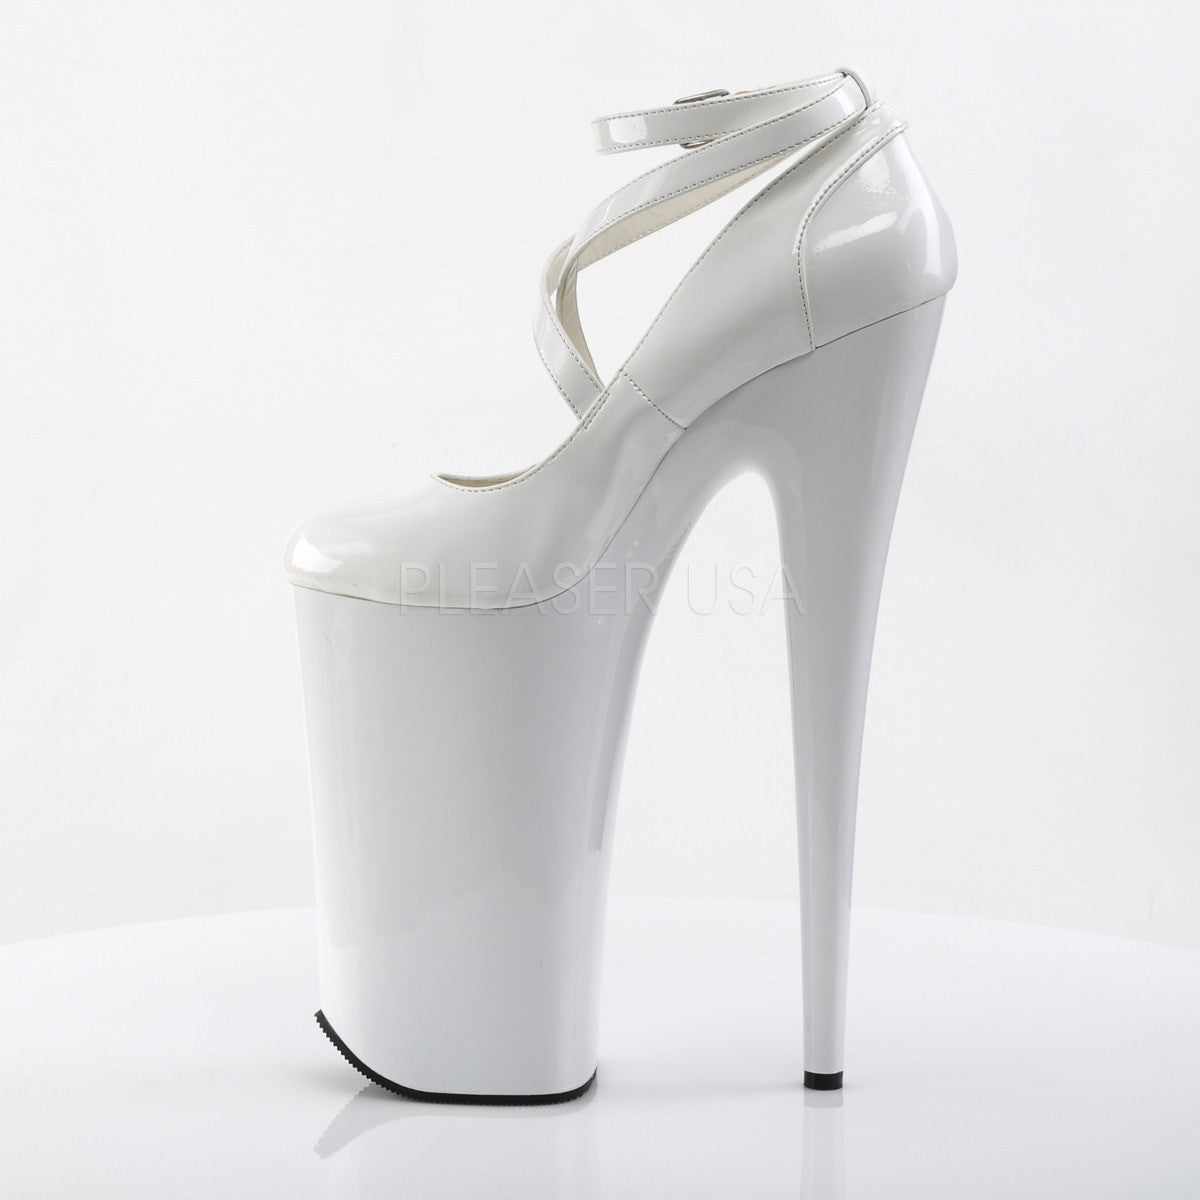 PLEASER BEYOND-087 White Extreme 10 Inch High Heels - Shoecup.com - 3